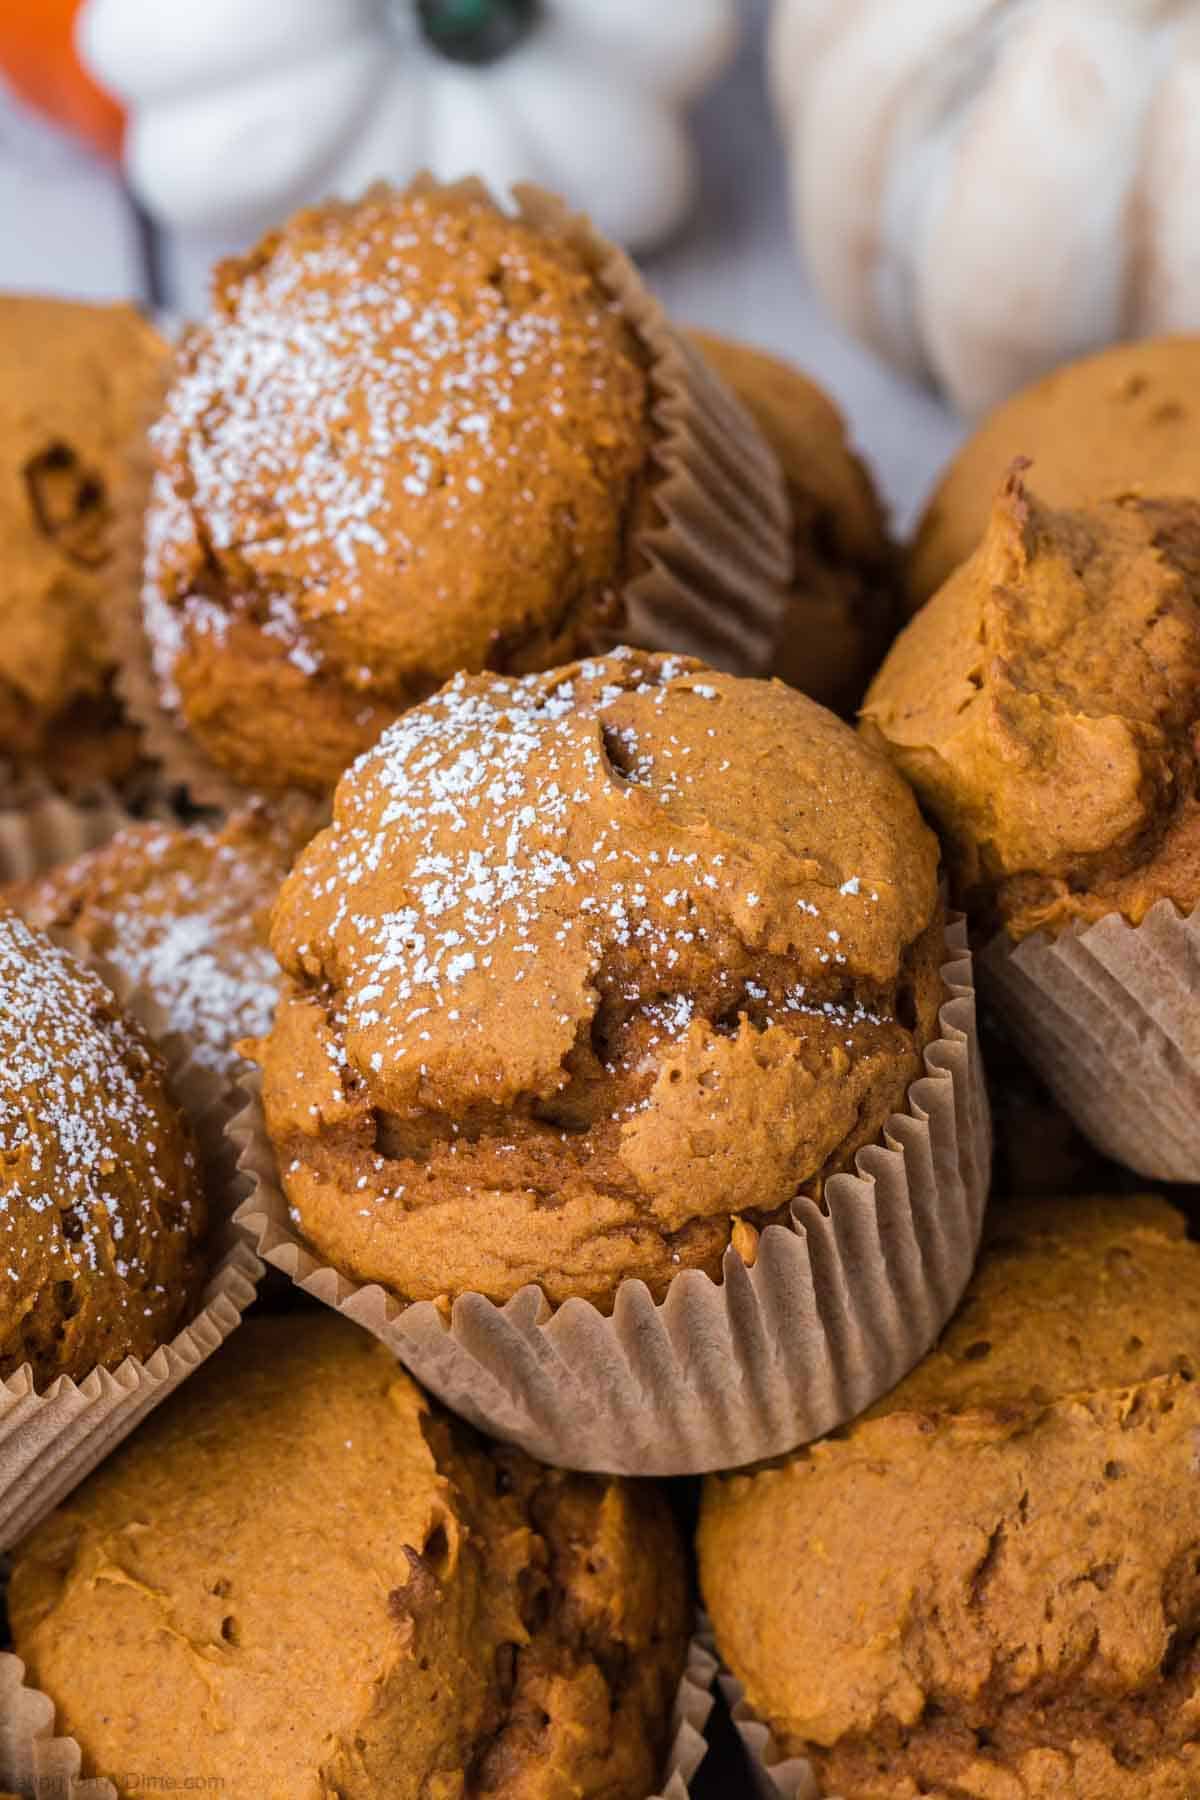 A stack of freshly baked 2 Ingredient Pumpkin Muffins with light dustings of powdered sugar on top. The muffins are housed in rustic paper liners, giving them a homemade and cozy appearance. Additionally, there are white pumpkins in the blurred background, enhancing the autumnal feel.